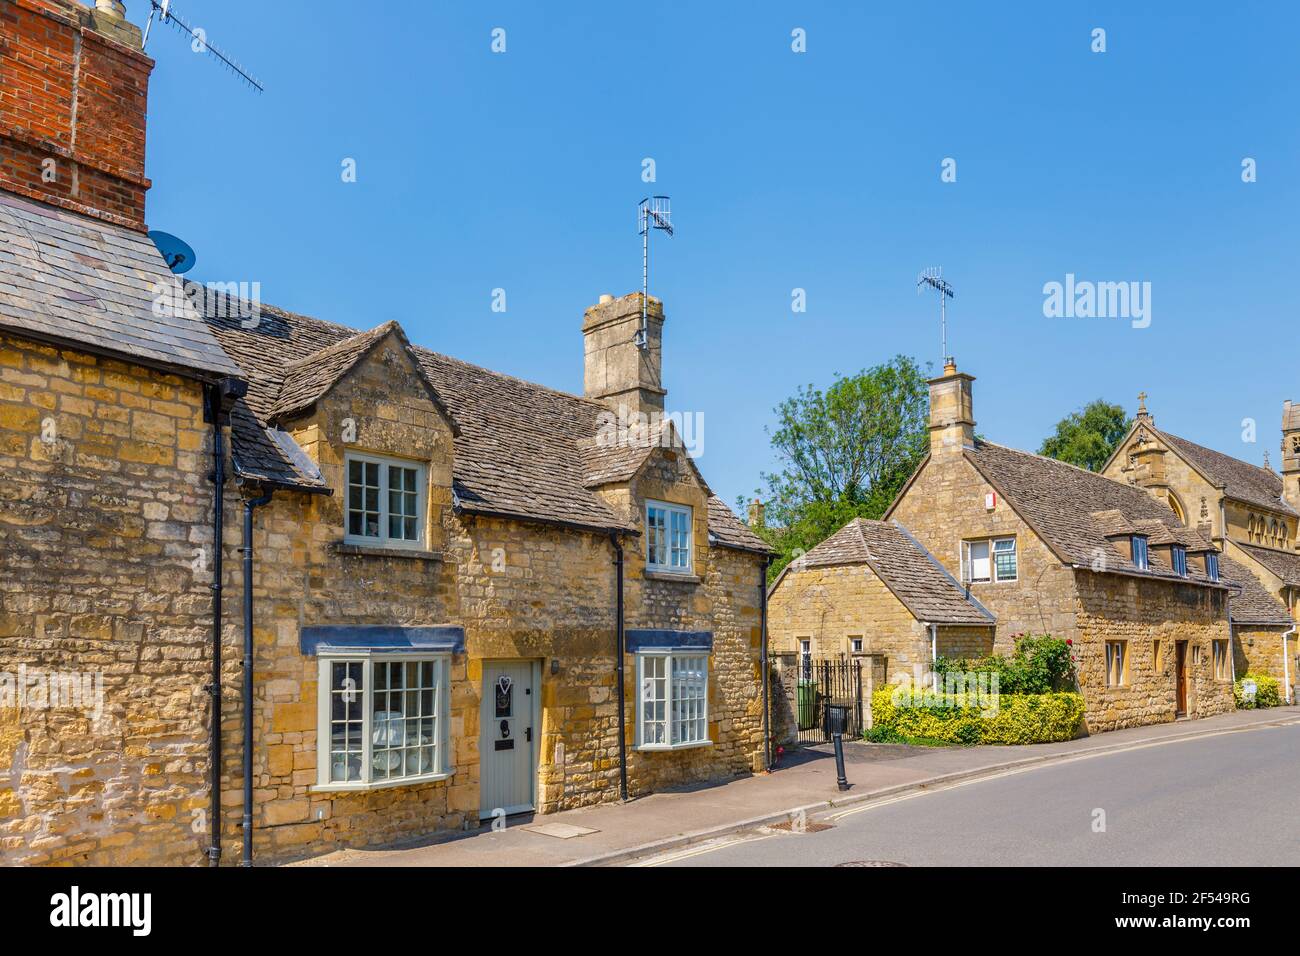 Typical picturesque roadside Cotswold stone slate roof houses in Chipping Campden, a small market town in the Cotswolds in Gloucestershire Stock Photo